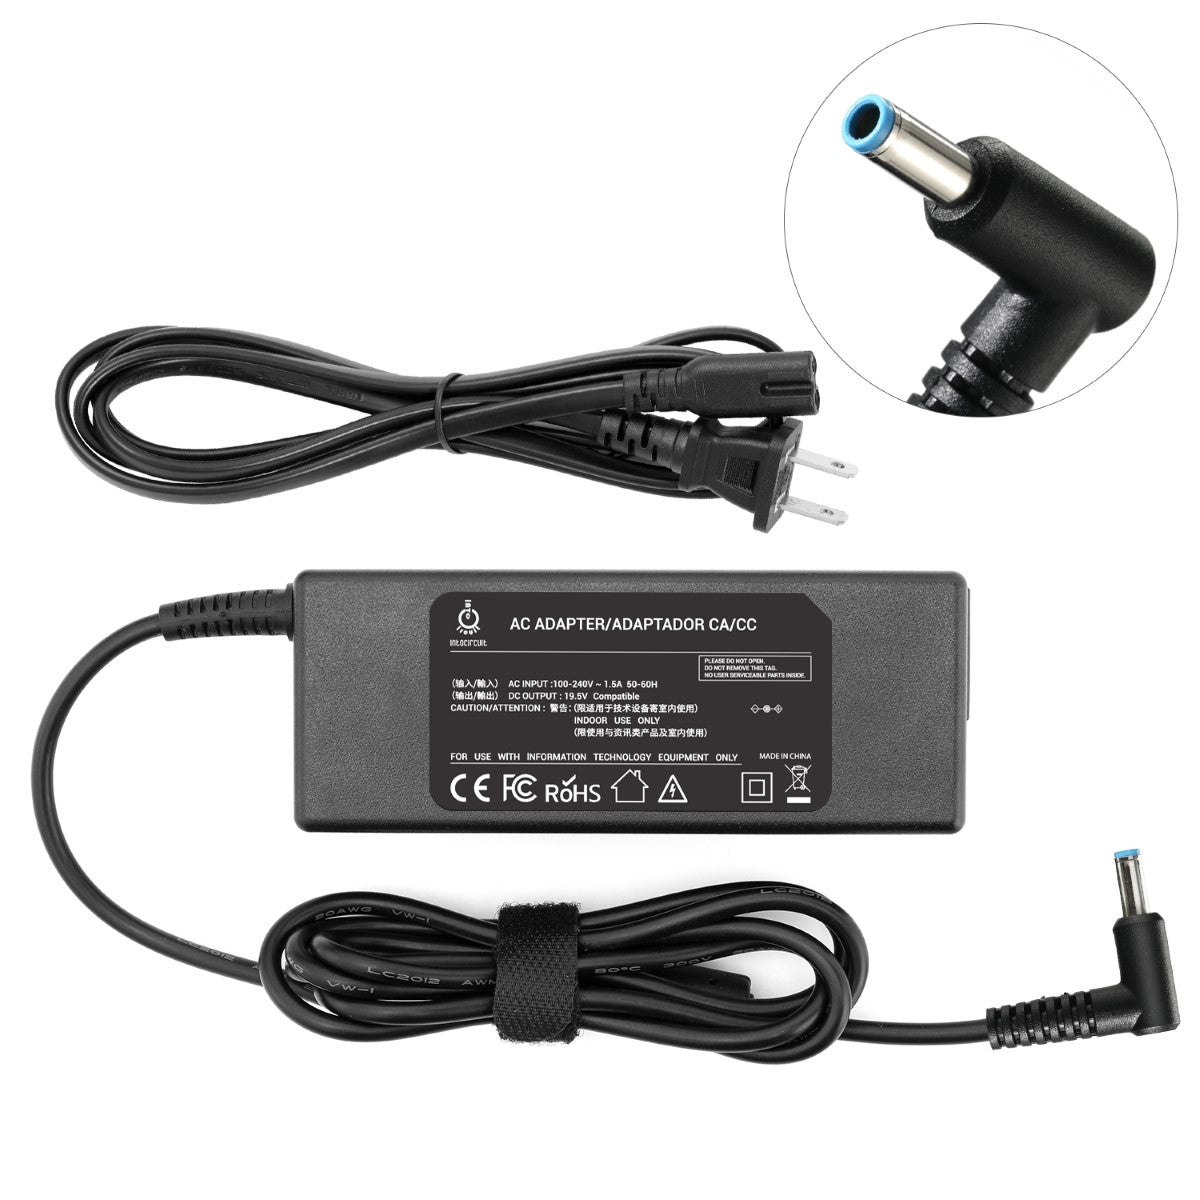 Charger for HP Elitebook Folio 1040 G3 Laptop